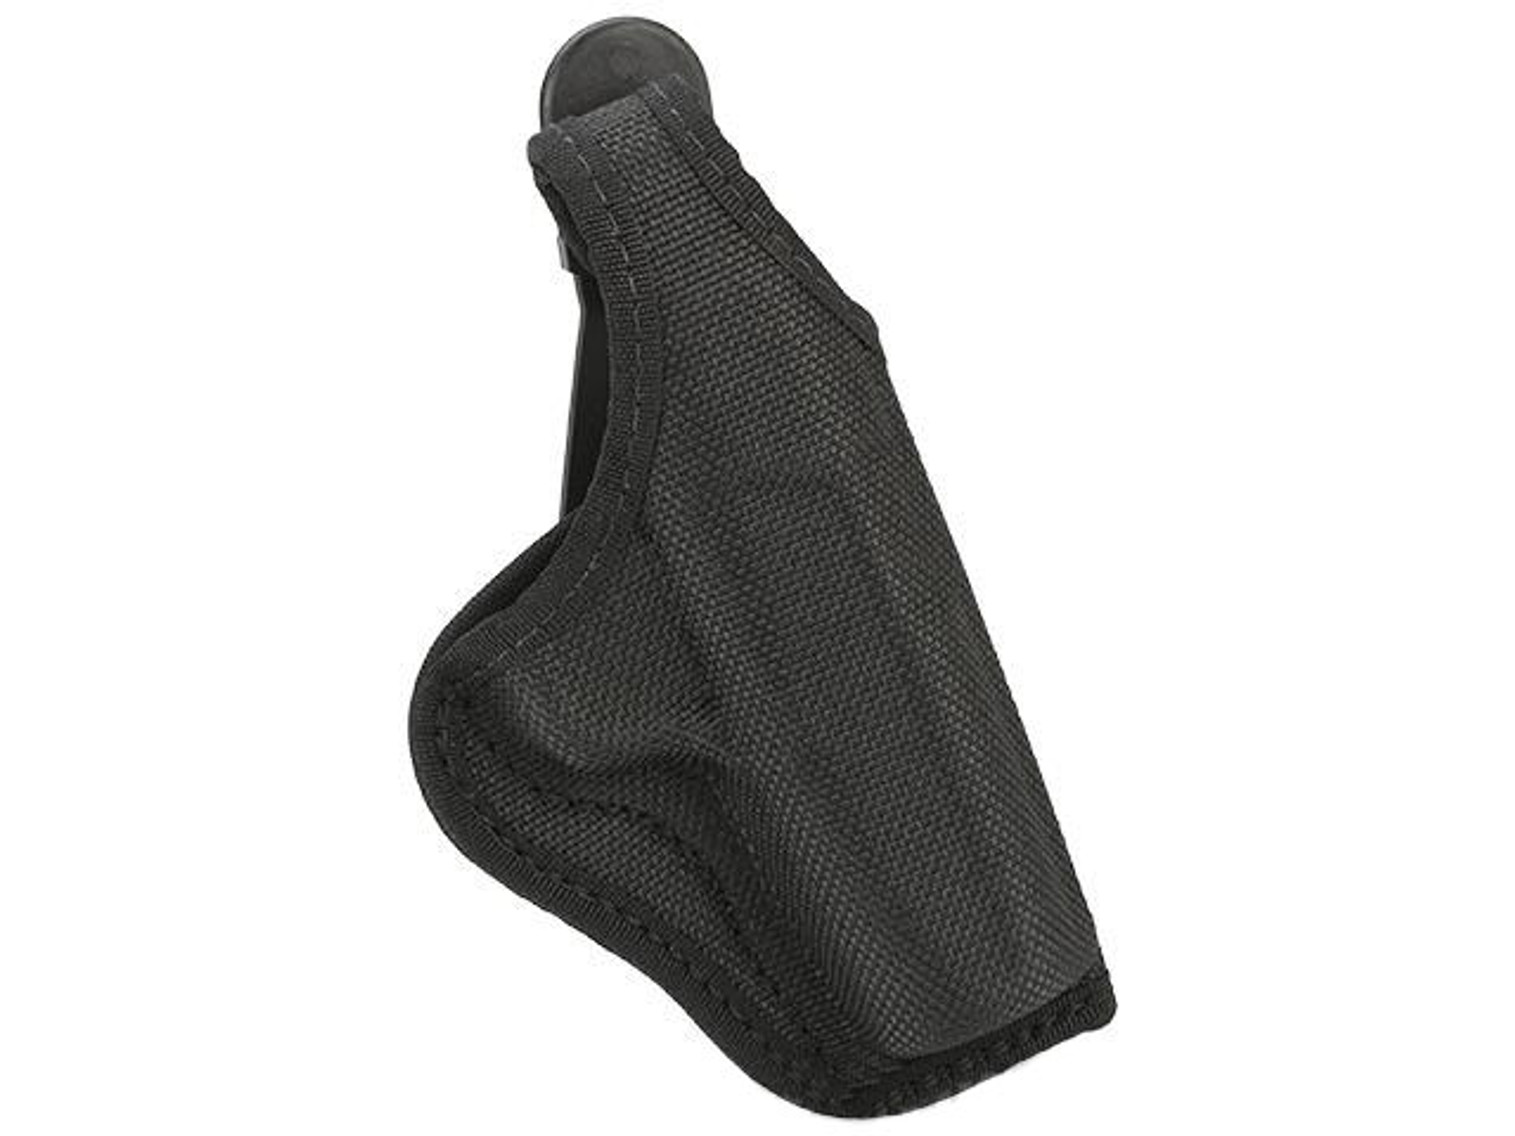 SAFARILAND / BIANCHI AccuMold Belt Clip Holster with Thumbsnap - Medium Auto 3" / Colt Govt. (Right)